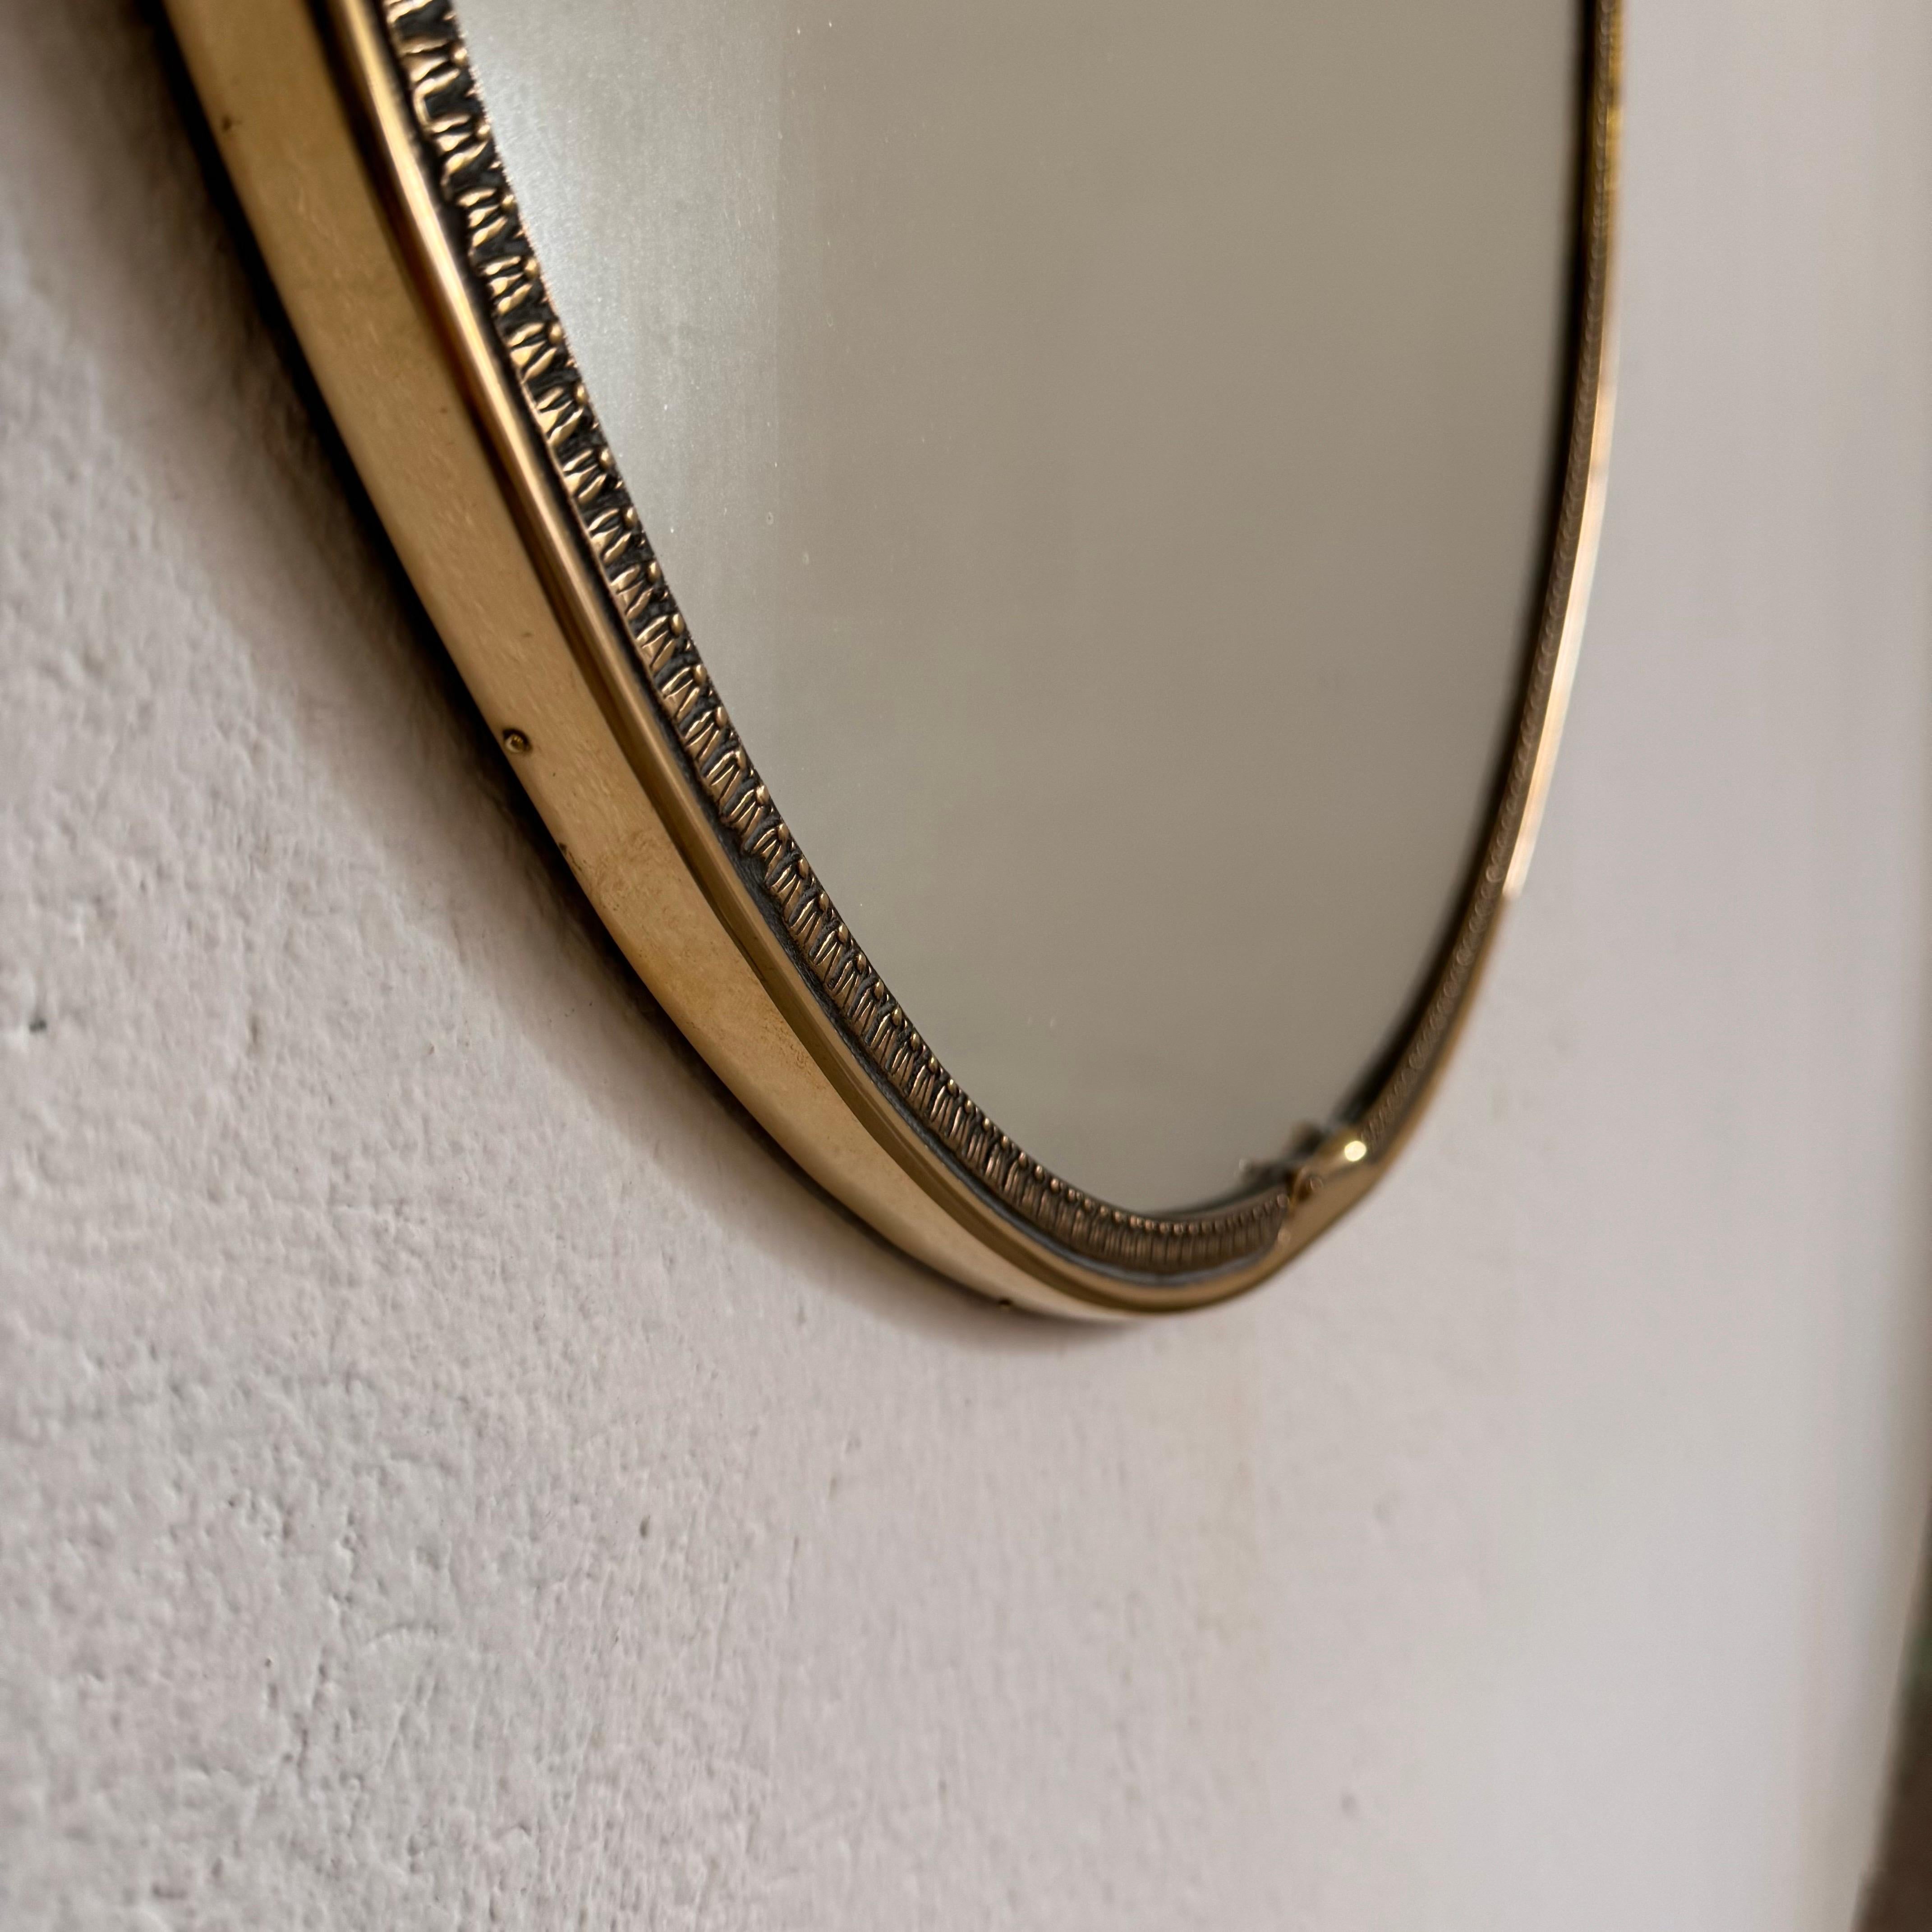 Exquisite 1950s Italian Brass Mirror in the Style of Gio Ponti For Sale 4